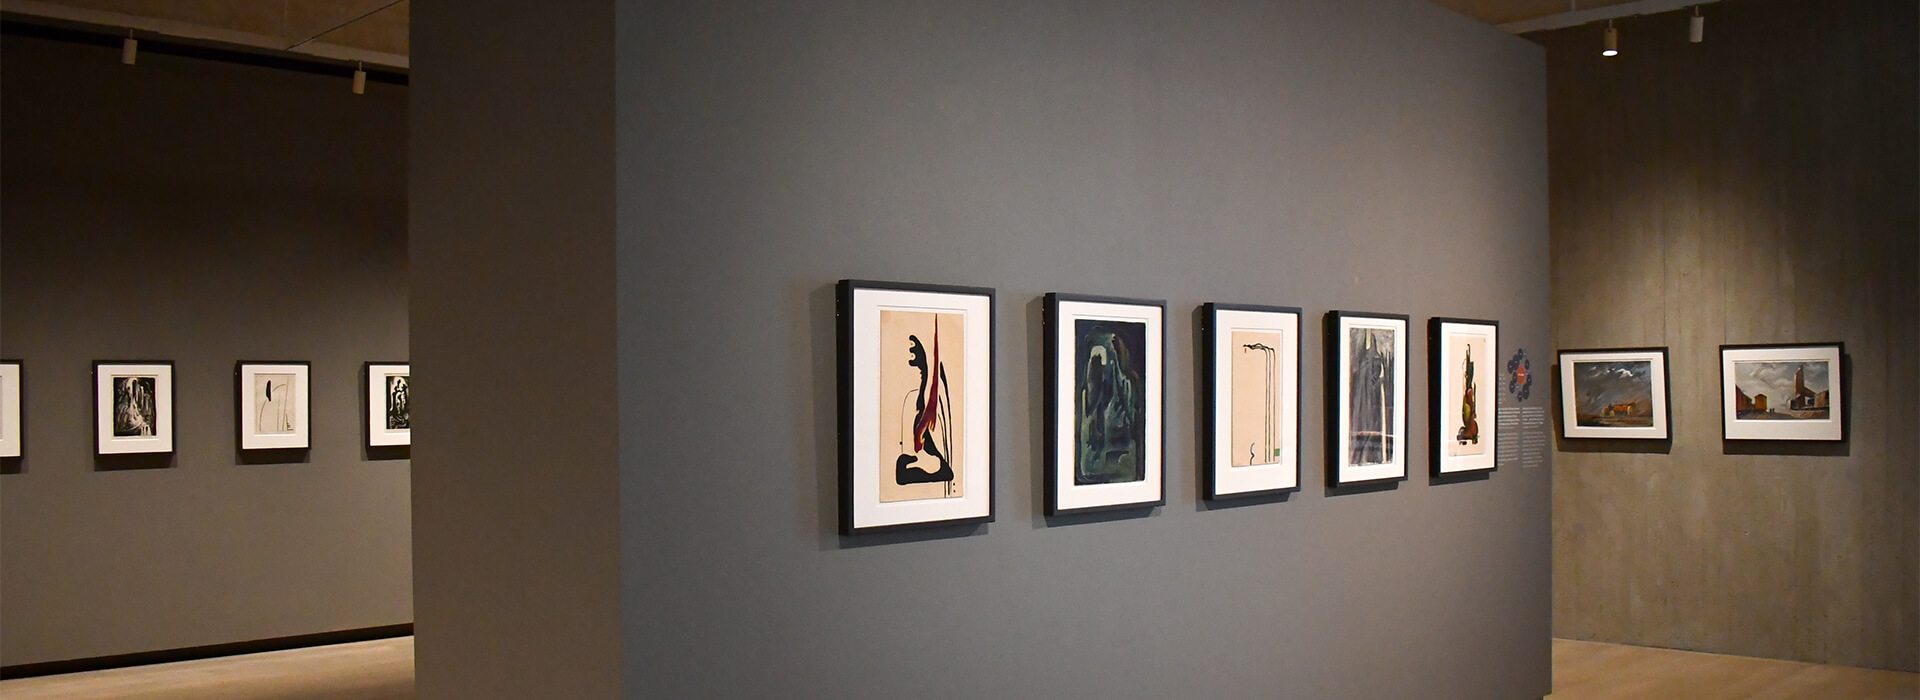 Image of gallery with gray walls and small framed artworks on paper